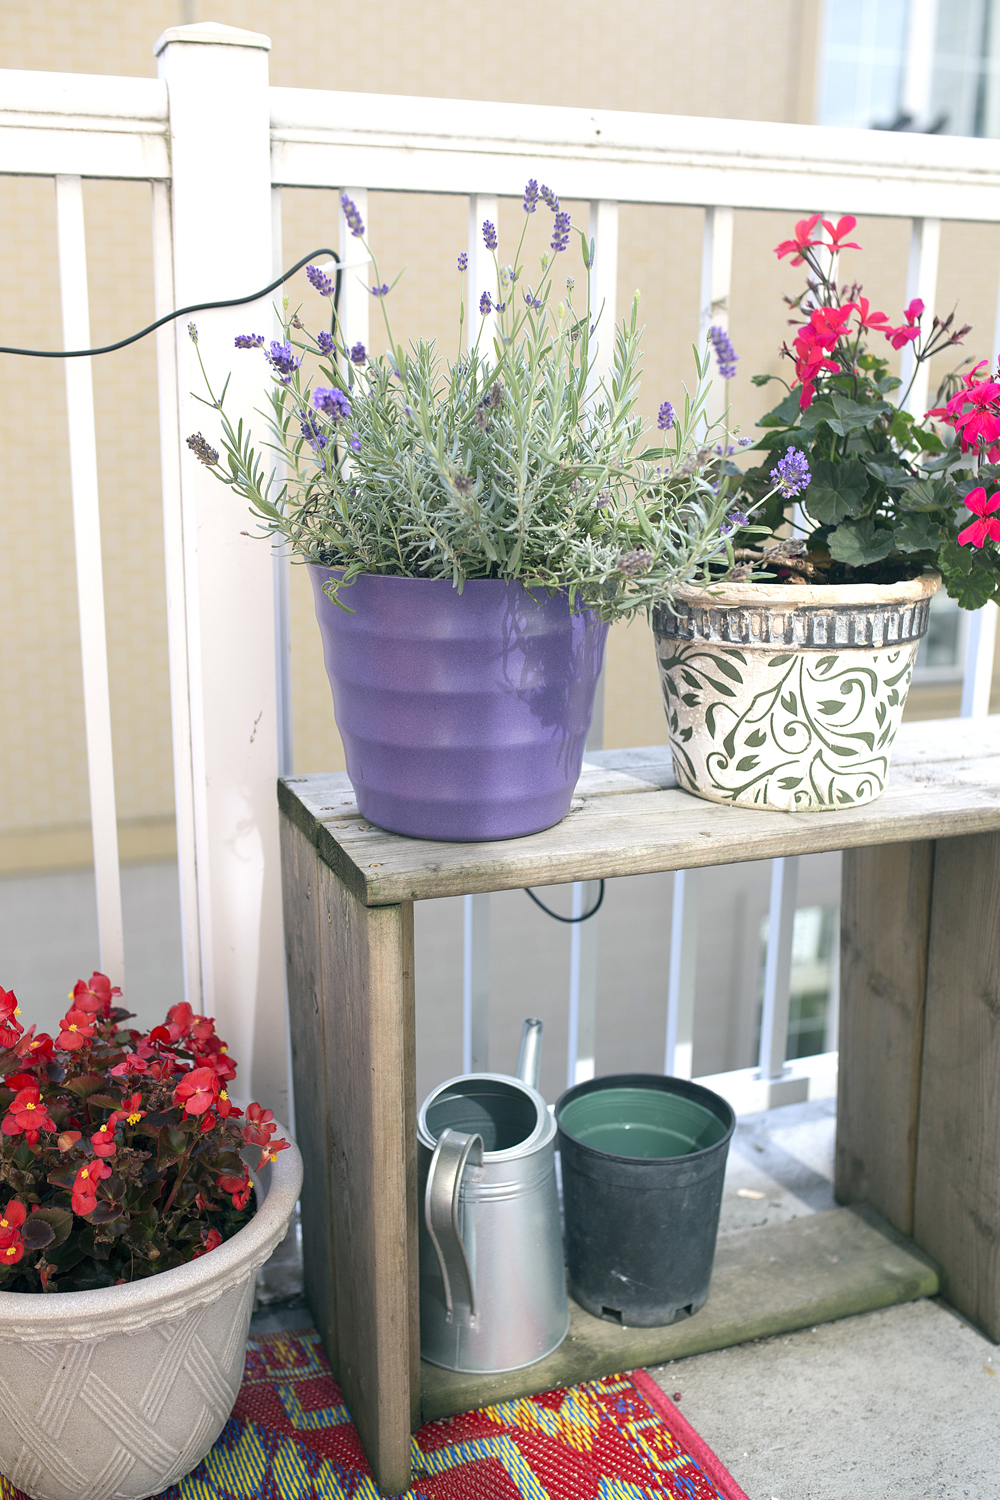 A wood crate holding watering cans and a variety of potted plants